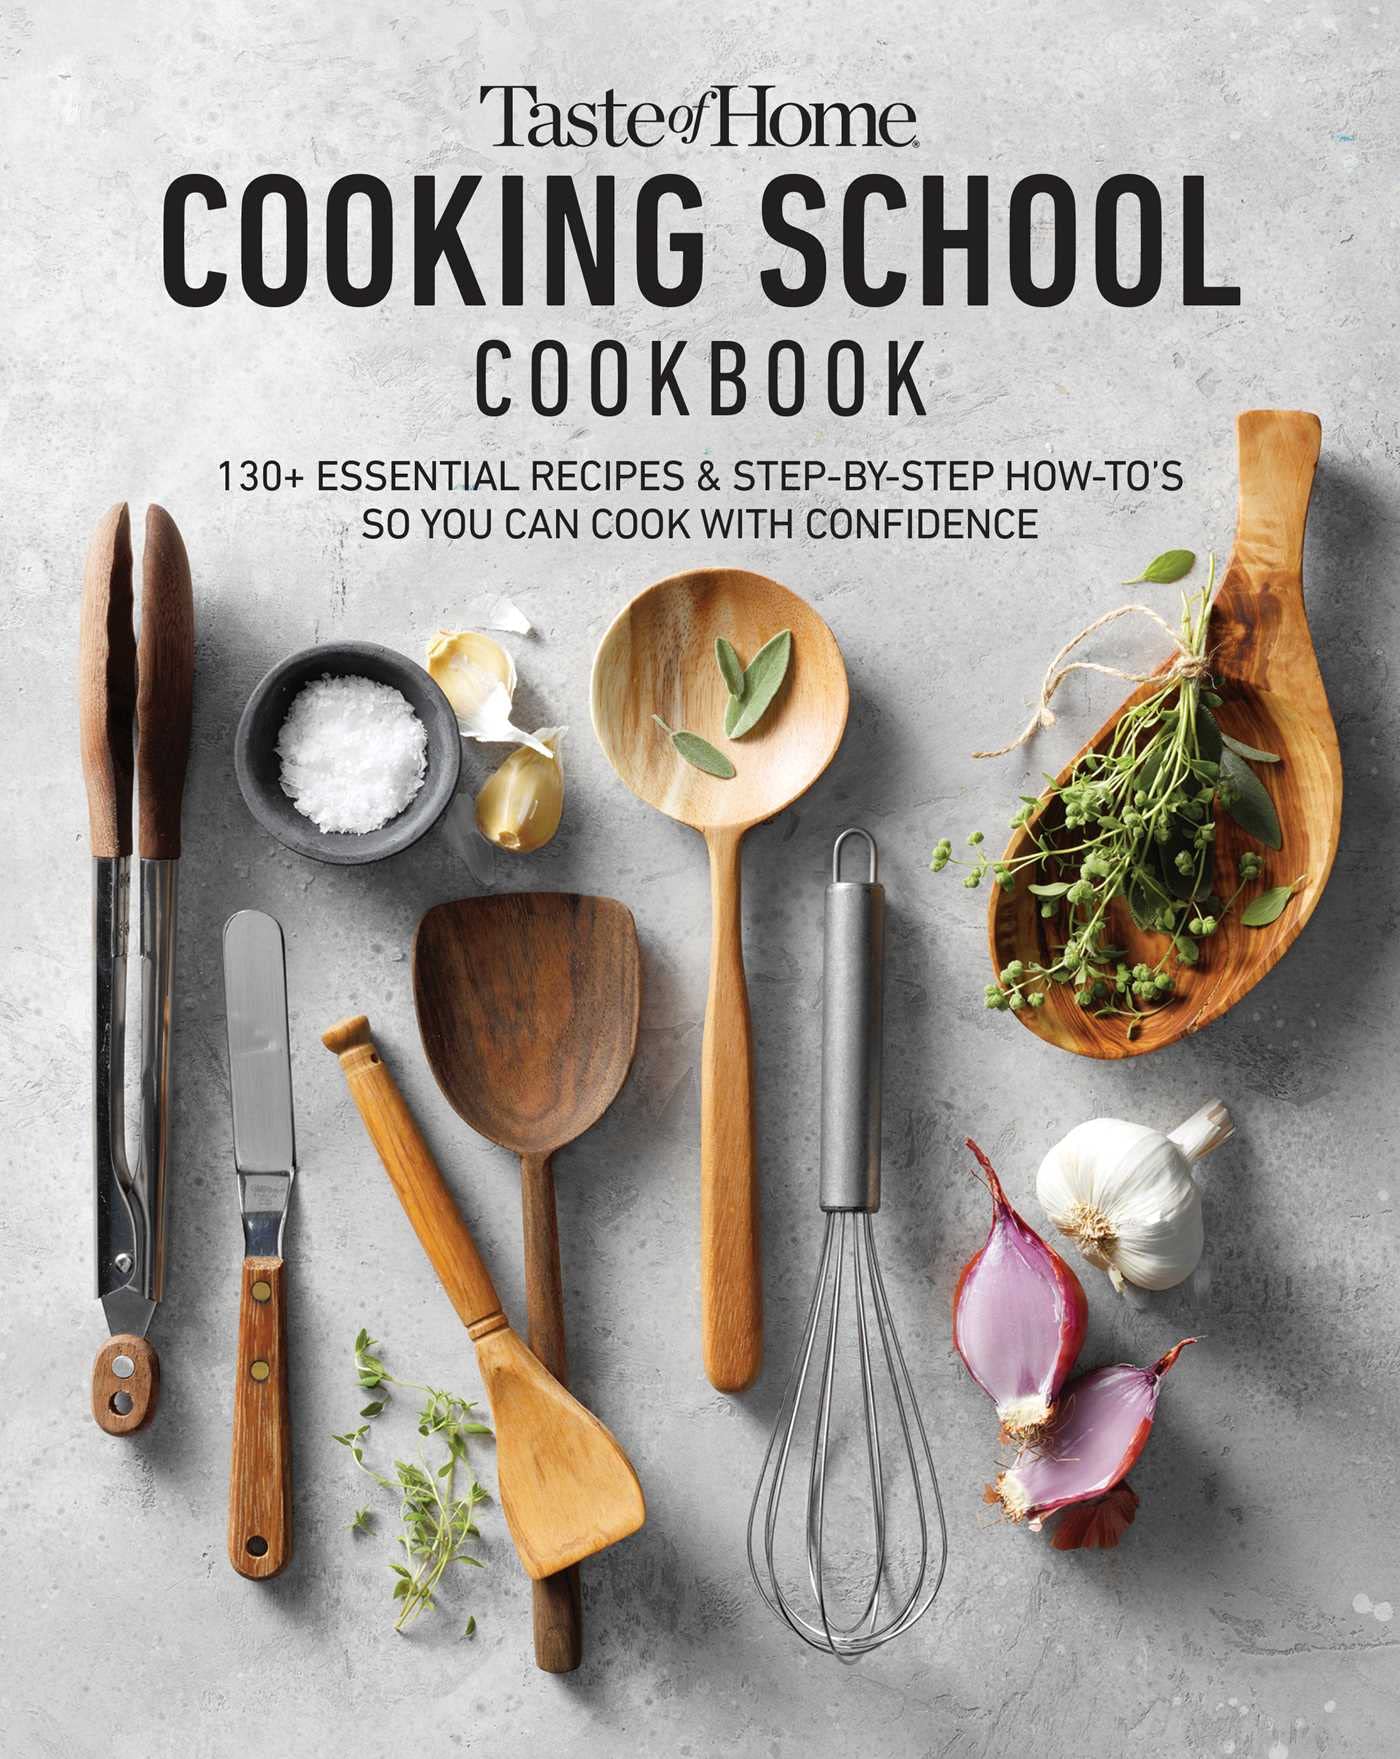 Taste of Home Cooking School Cookbook: Step-By-Step Instructions, How-To Photos and the Recipes Todays Home Cooks Rely on Most (Hardcover)